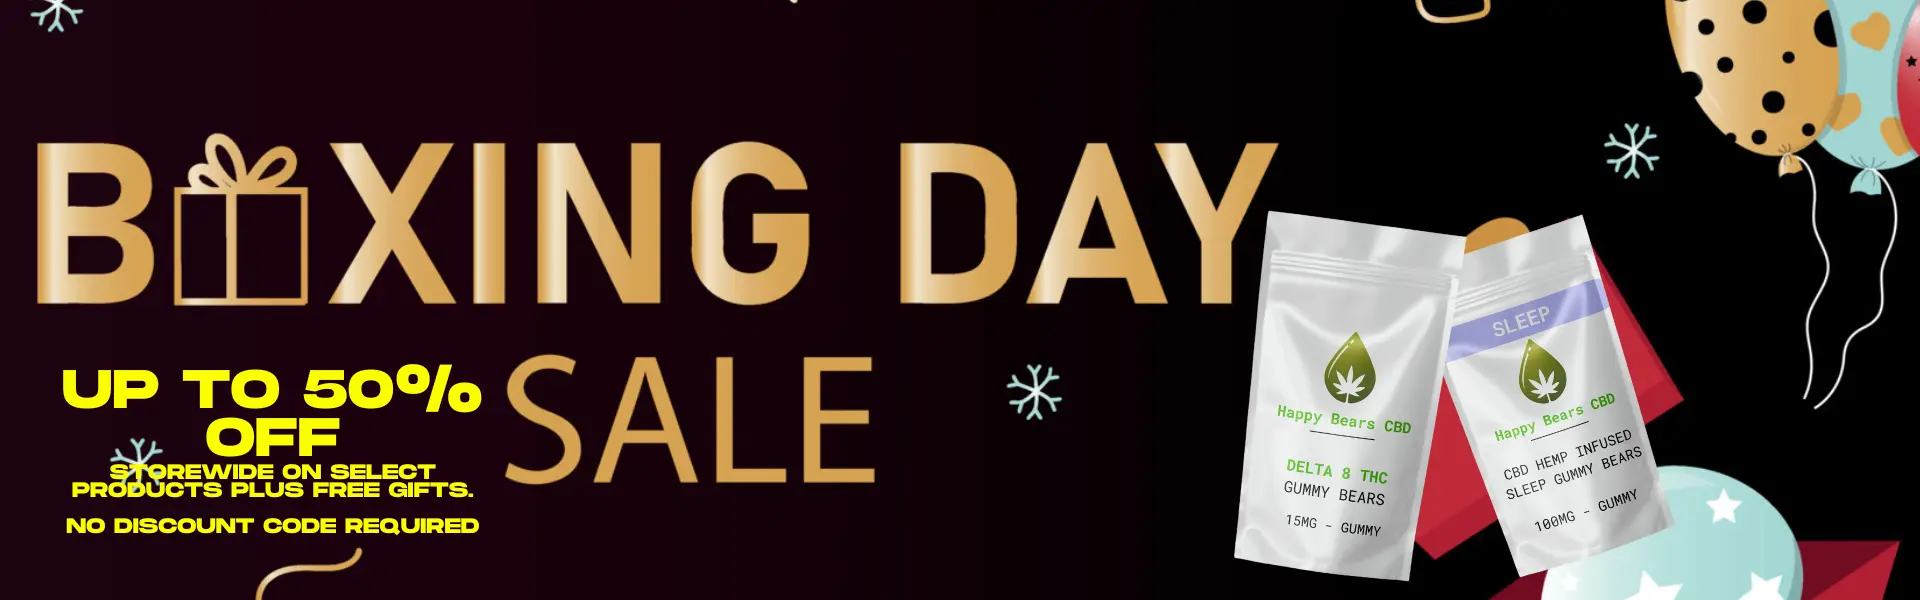 BOXING DAY PROMO